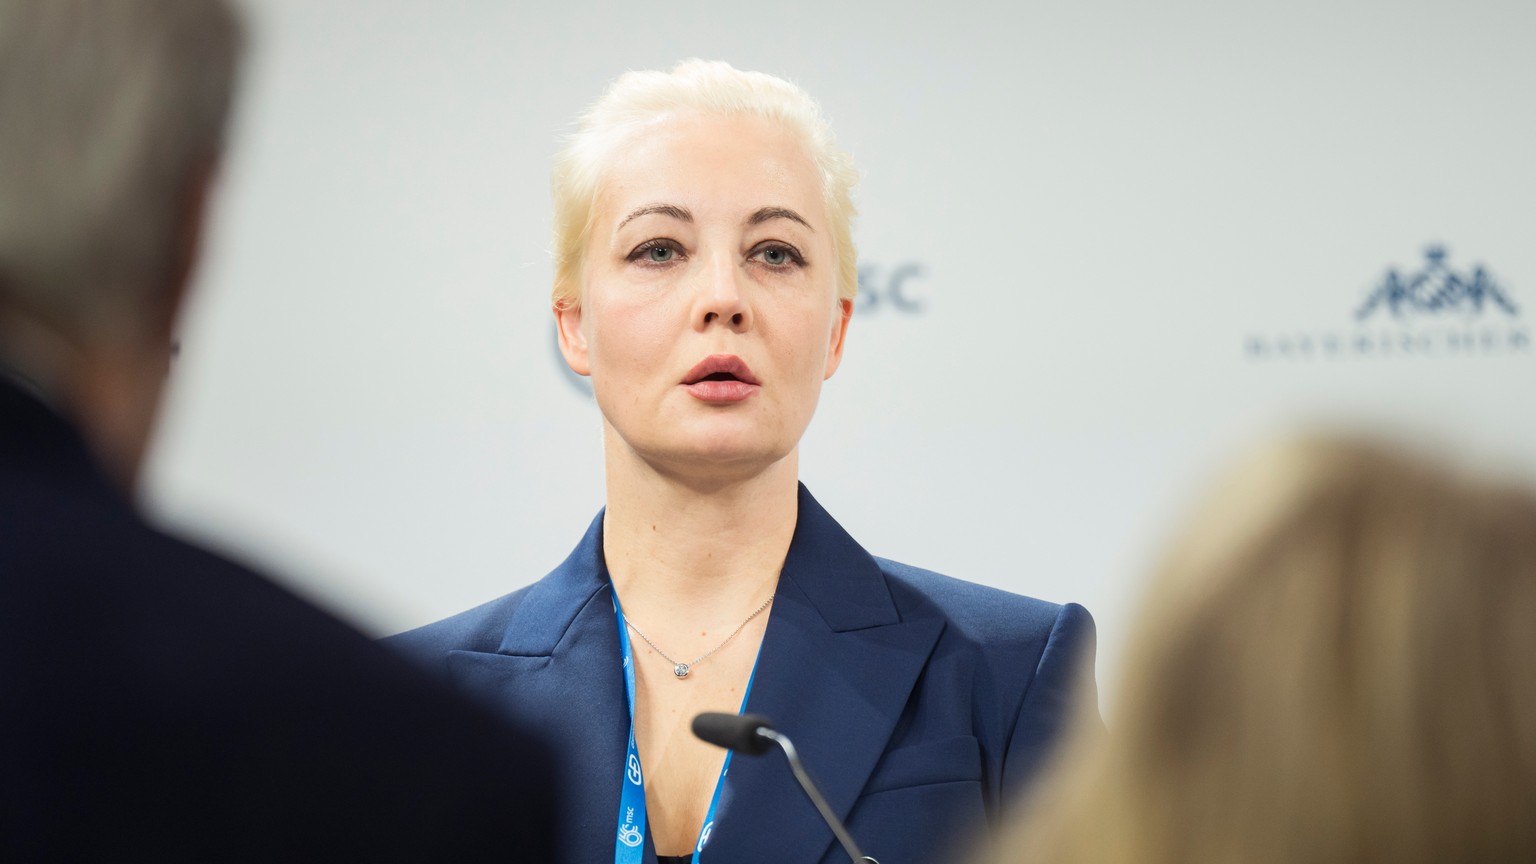 epa11158458 A handout photo made available by the Munich Security Conference shows Yulia Navalnaya, wife of late Russian opposition leader Alexei Navalny, attending the 60th Munich Security Conference ...